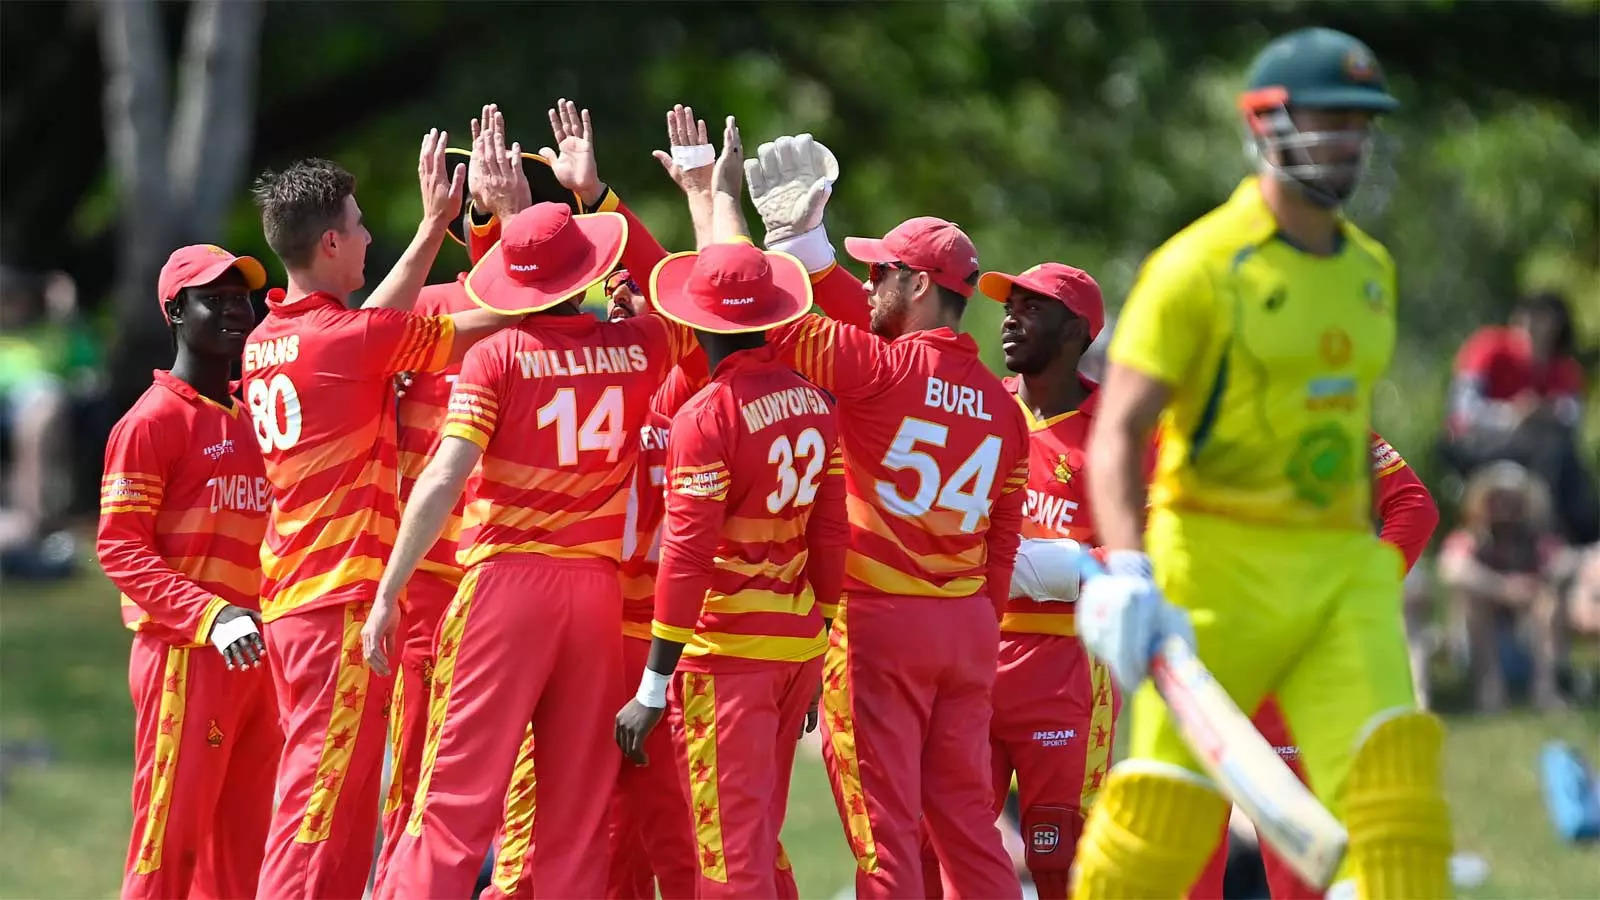 Leg-spinner Ryan Burl picked up 5-10 in just three overs on Saturday as Zimbabwe stunned Australia in the third one-day international